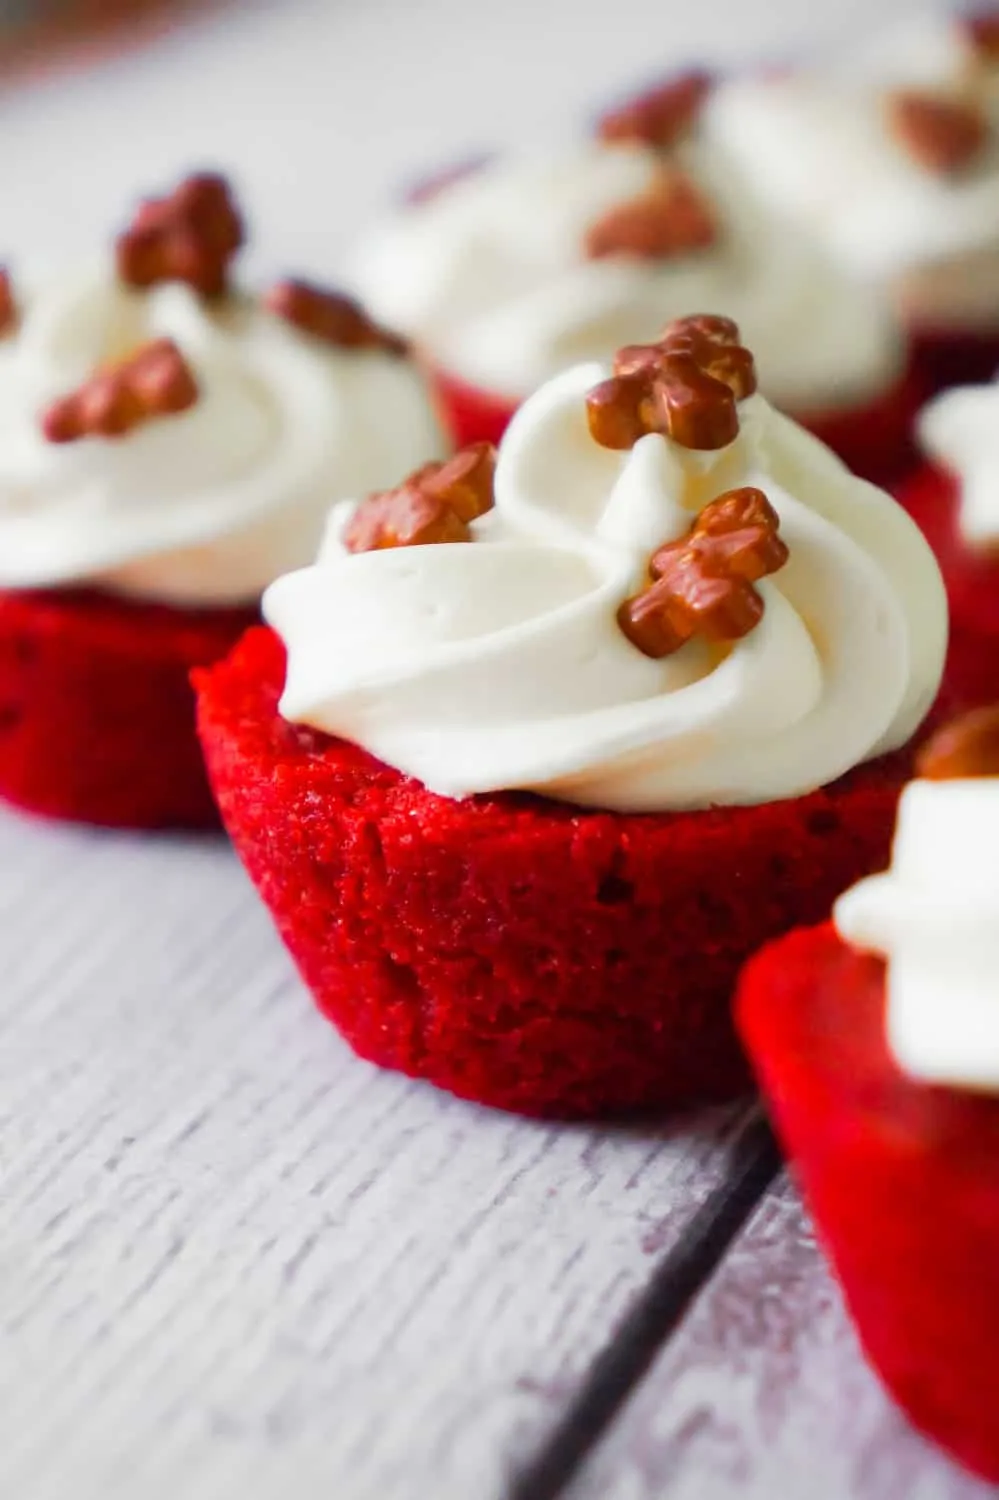 Red Velvet Brownie Bites are delicious mini desserts perfect for the holidays. These bite sized brownies are baked in mini muffin tins and topped with cream cheese frosting.